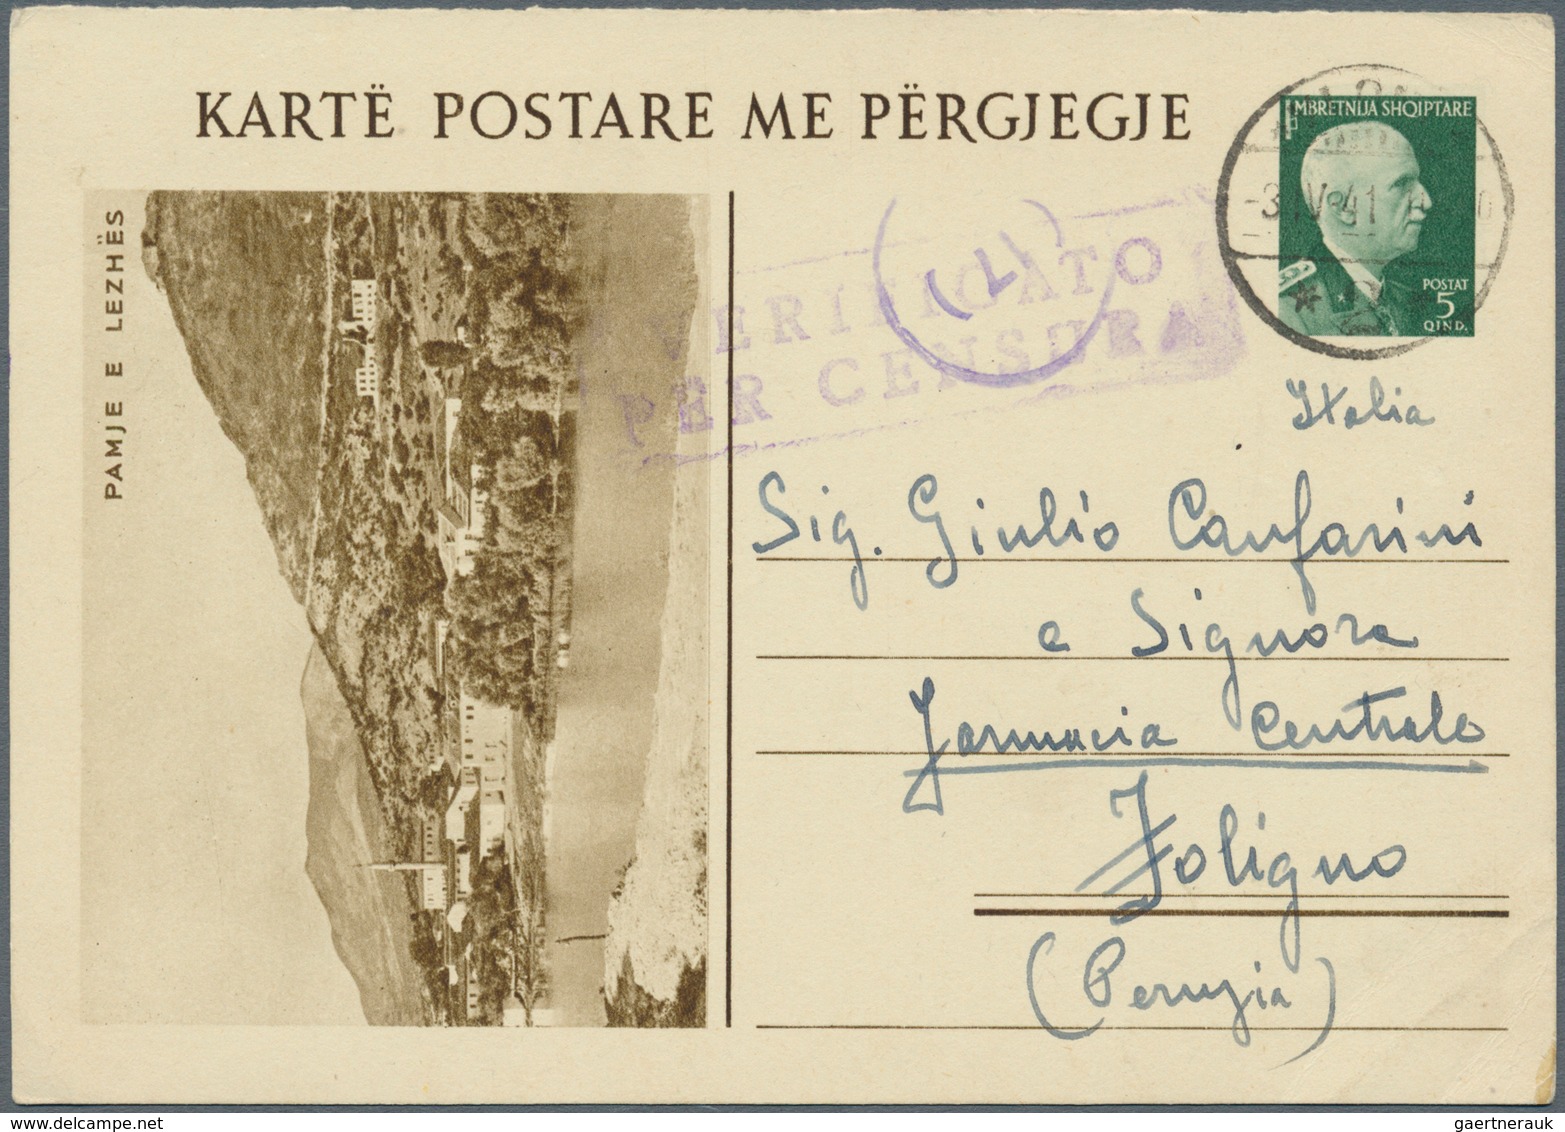 Albanien - Ganzsachen: 1941, 5 Q Green Postal Stationery Picture Replay Card (Pamje E Lezhes) With C - Albanië